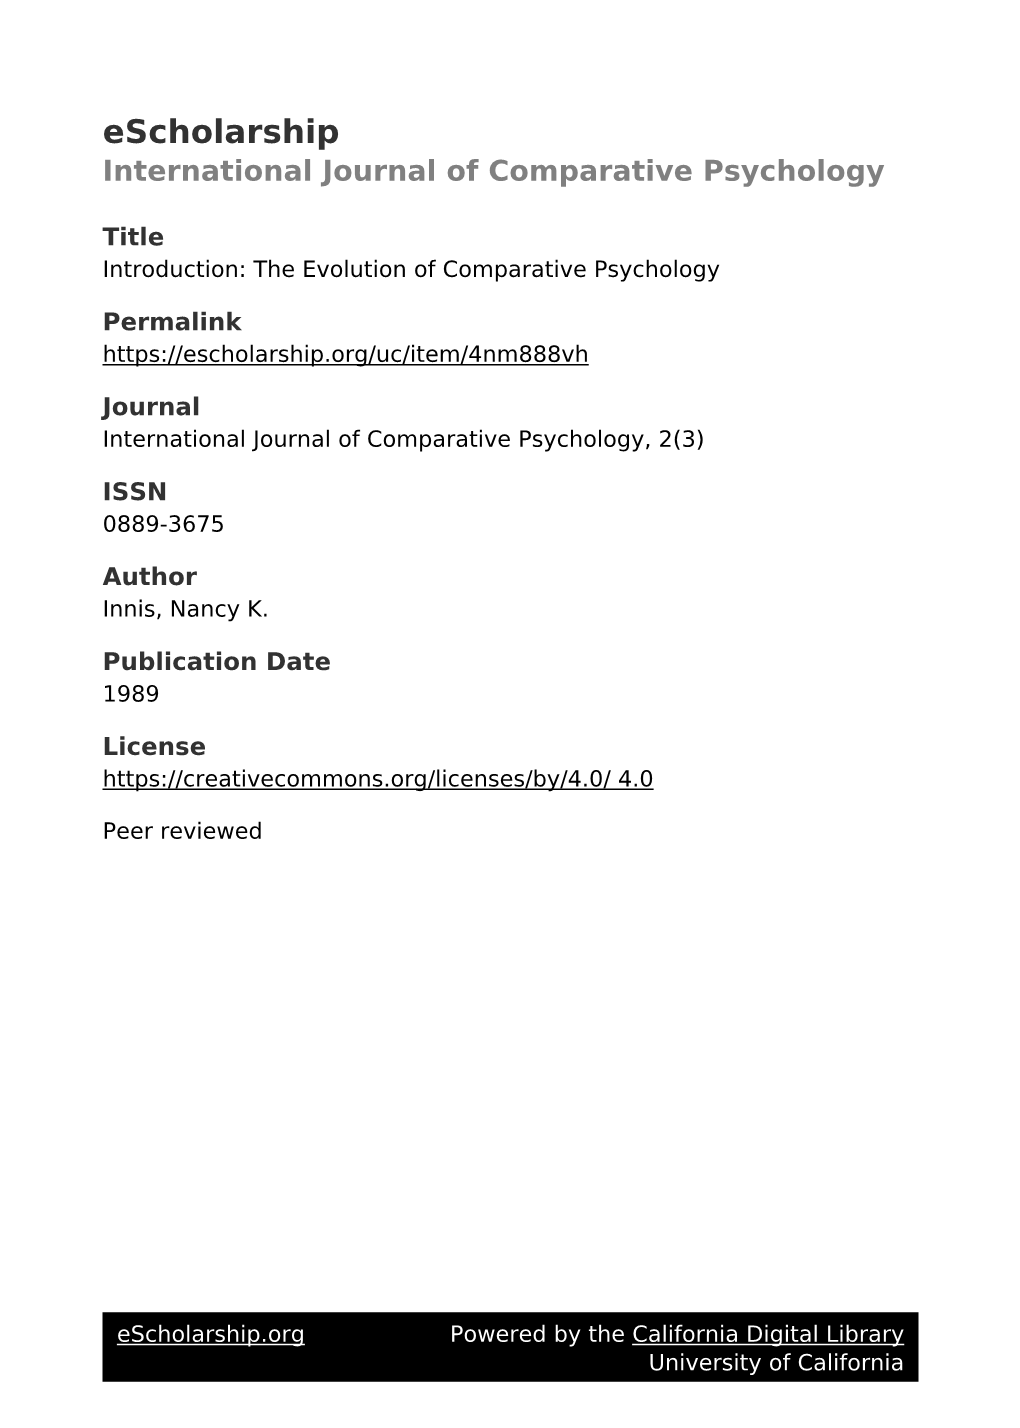 The Evolution of Comparative Psychology